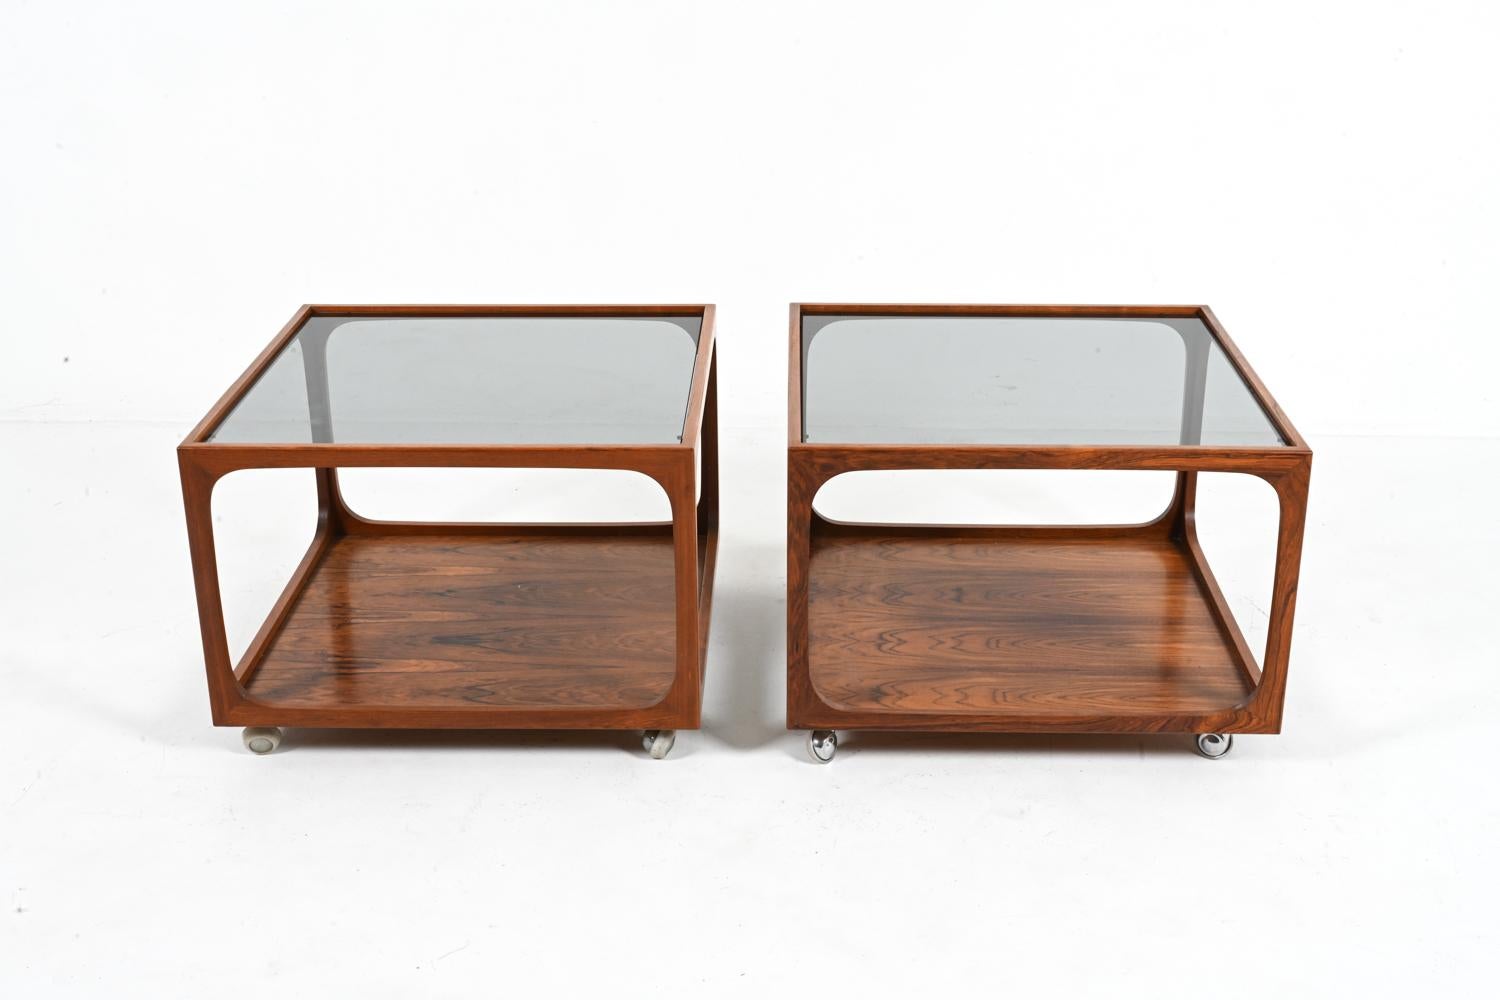 German Rare Pair of Rosewood & Smoked Glass Cube End Tables Attributed to Wilhelm Renz For Sale